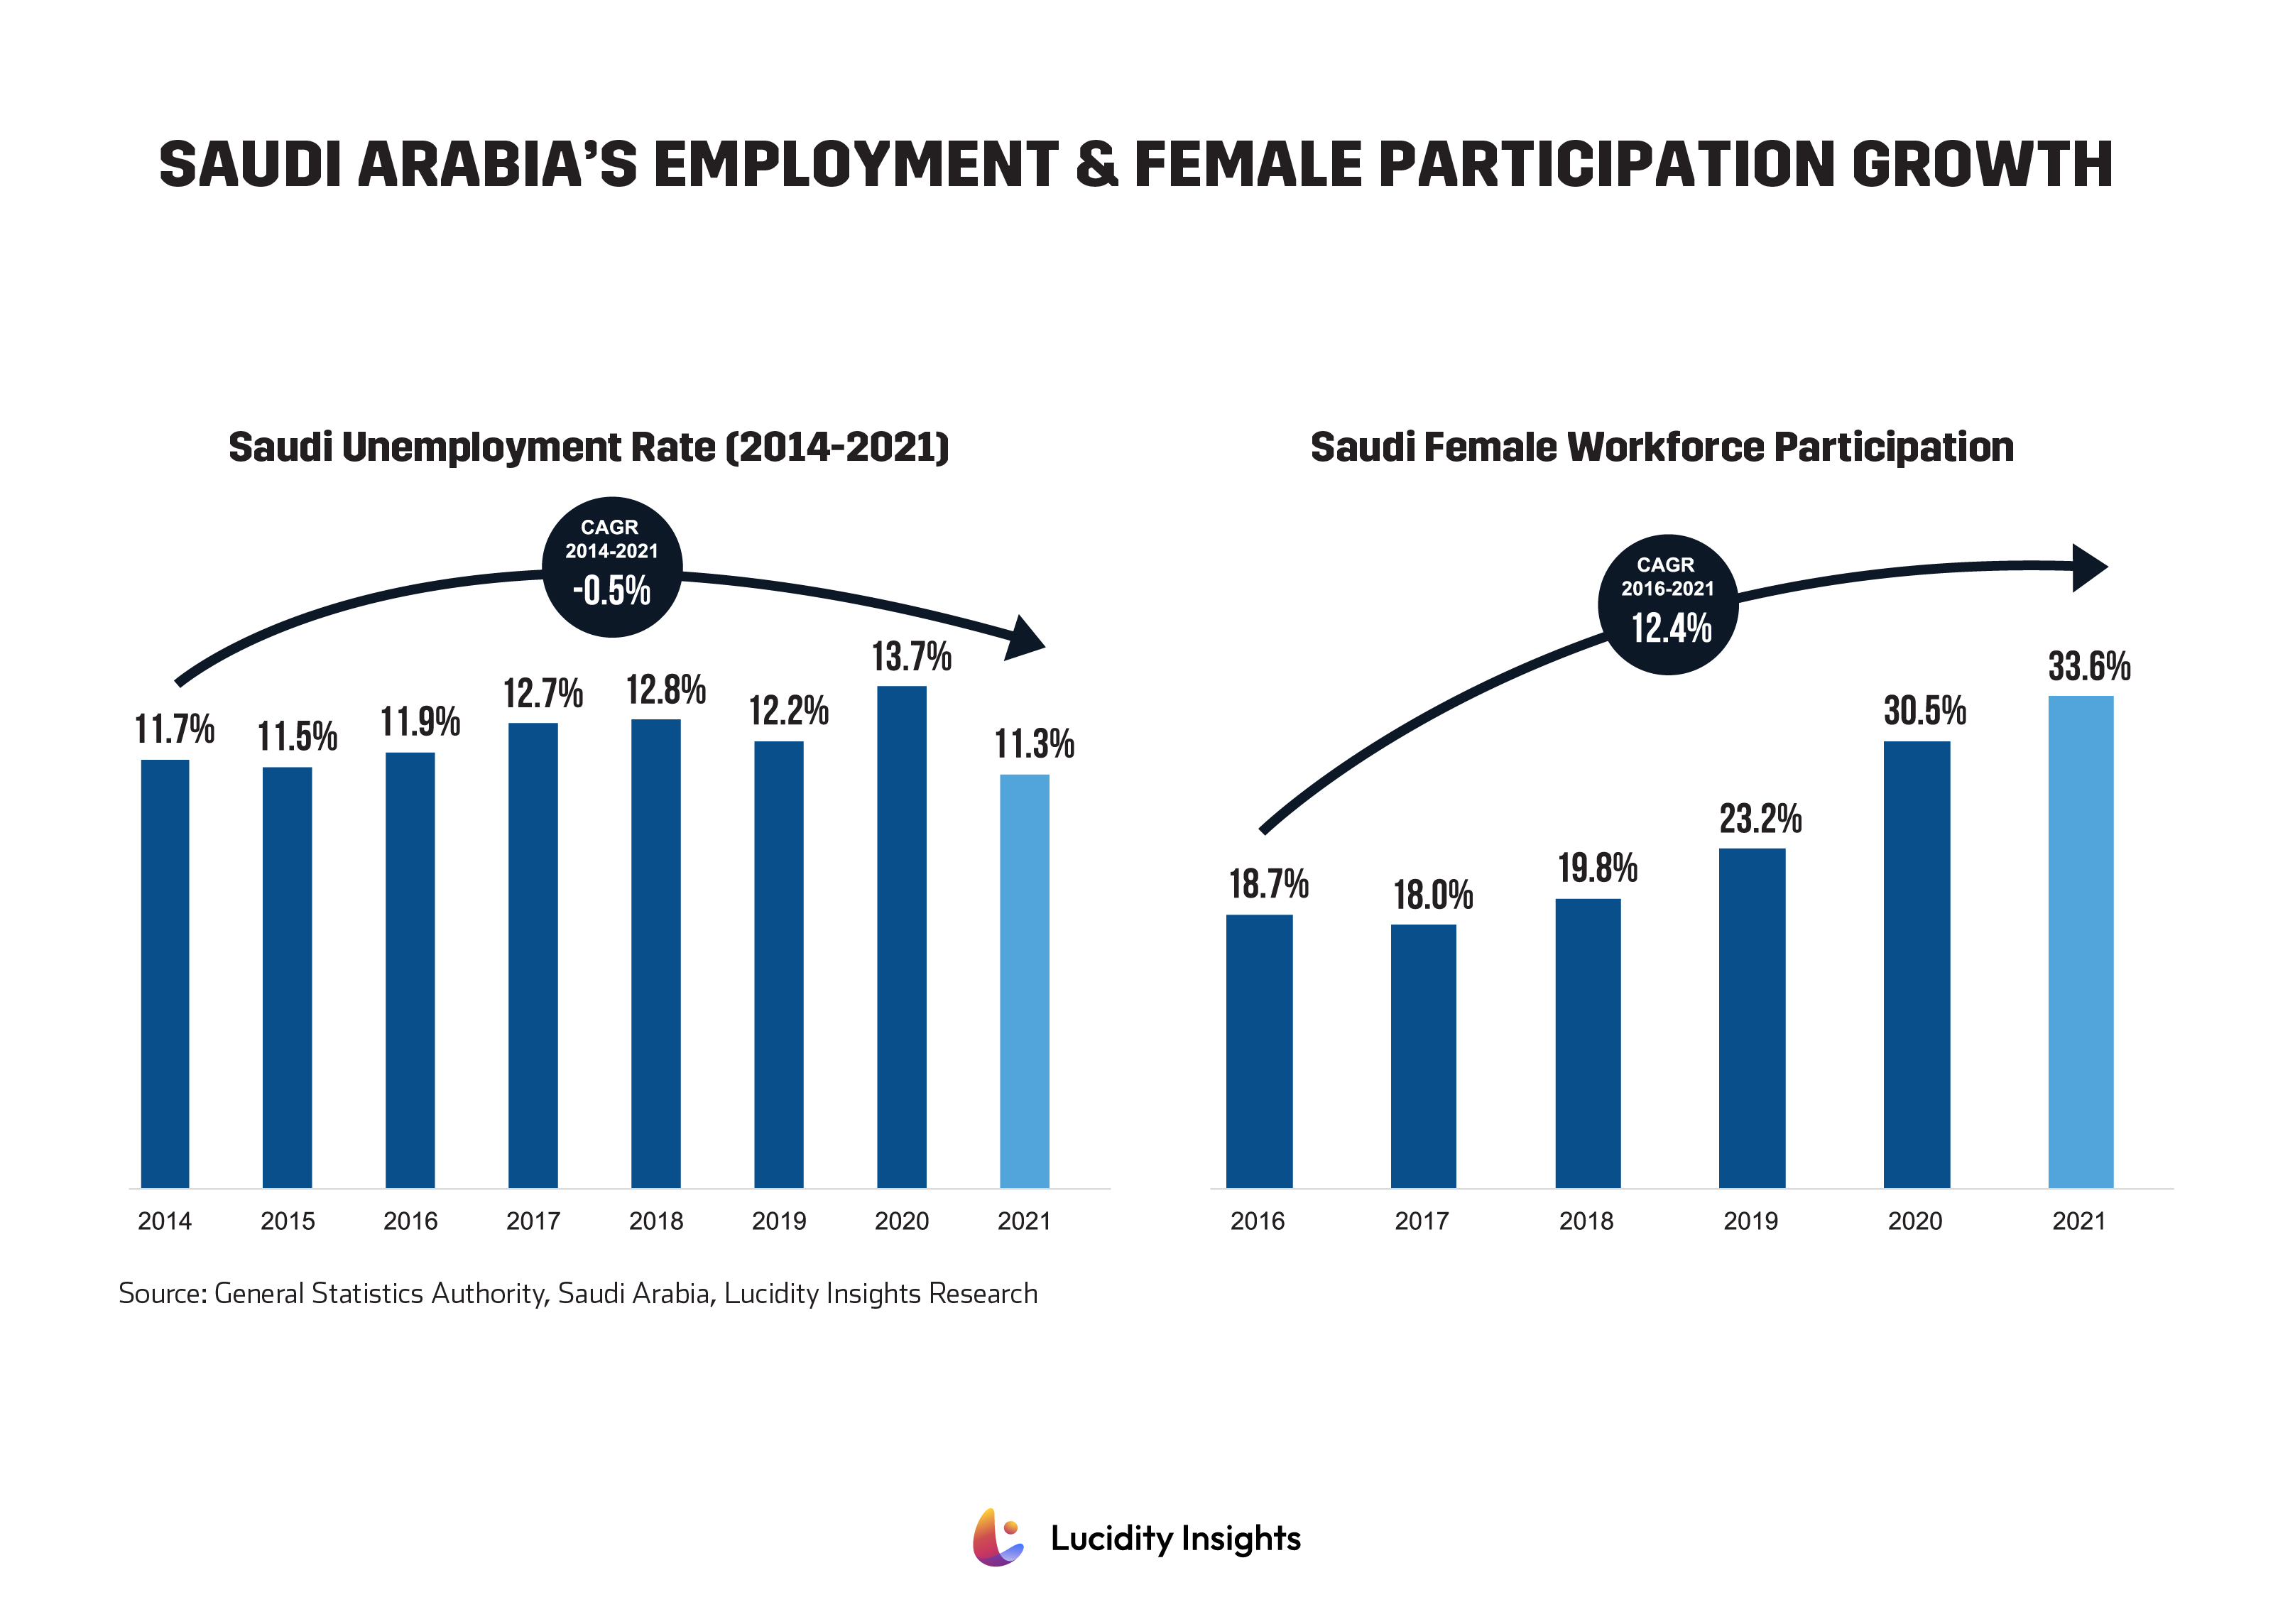 Saudi Arabia's Employment Growth & Female Workforce Participation Growth Rate